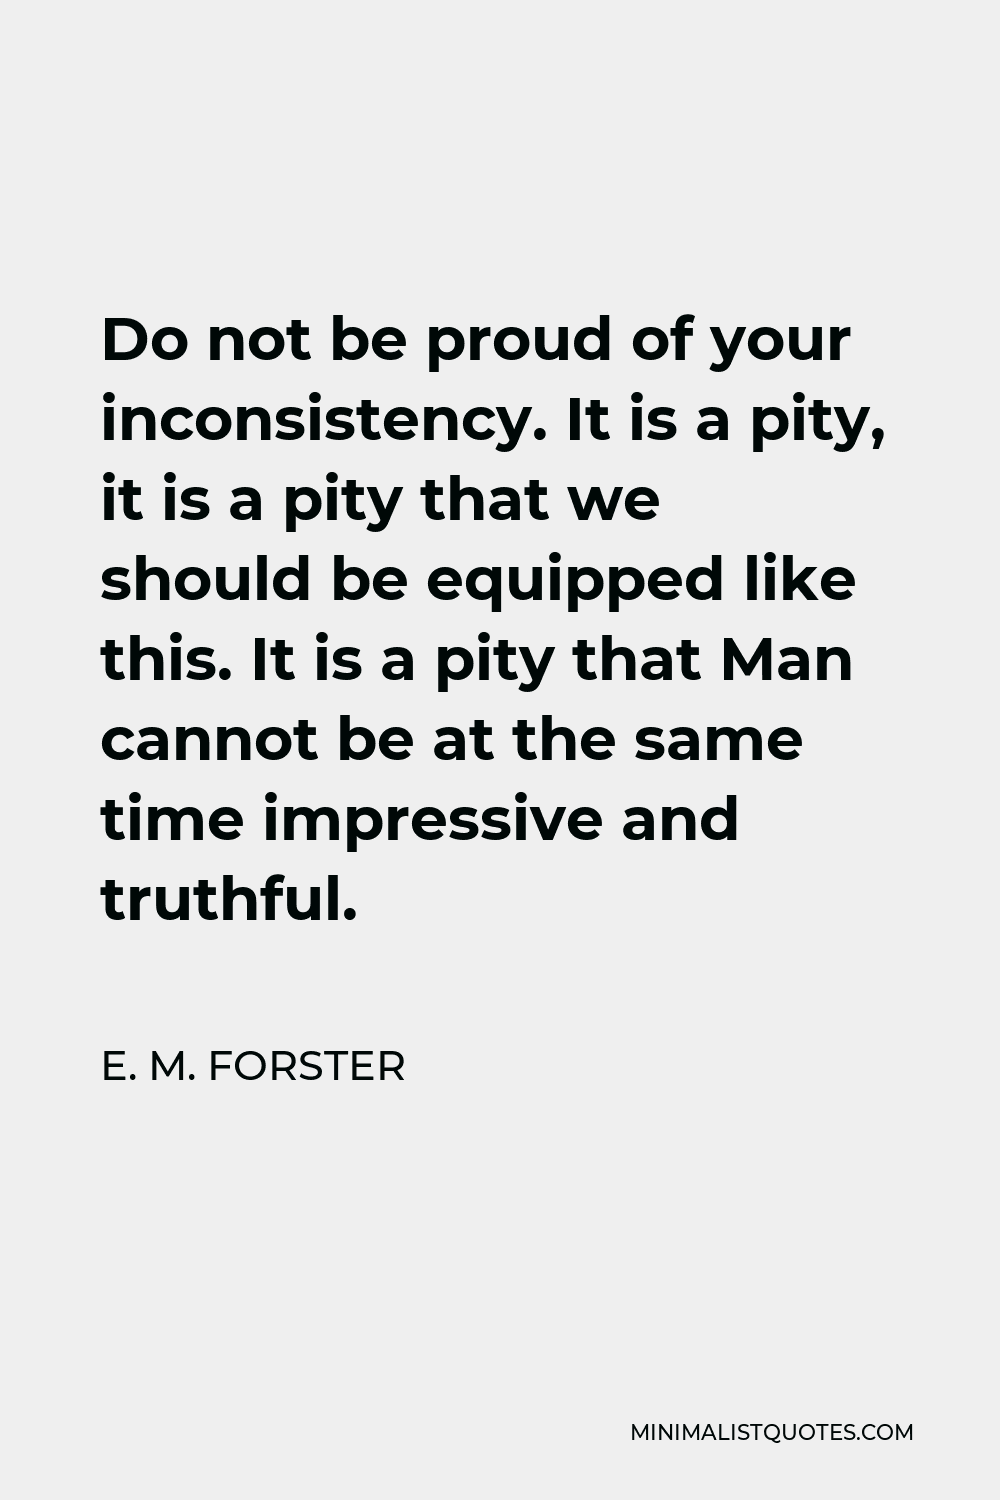 E. M. Forster Quote - Do not be proud of your inconsistency. It is a pity, it is a pity that we should be equipped like this. It is a pity that Man cannot be at the same time impressive and truthful.